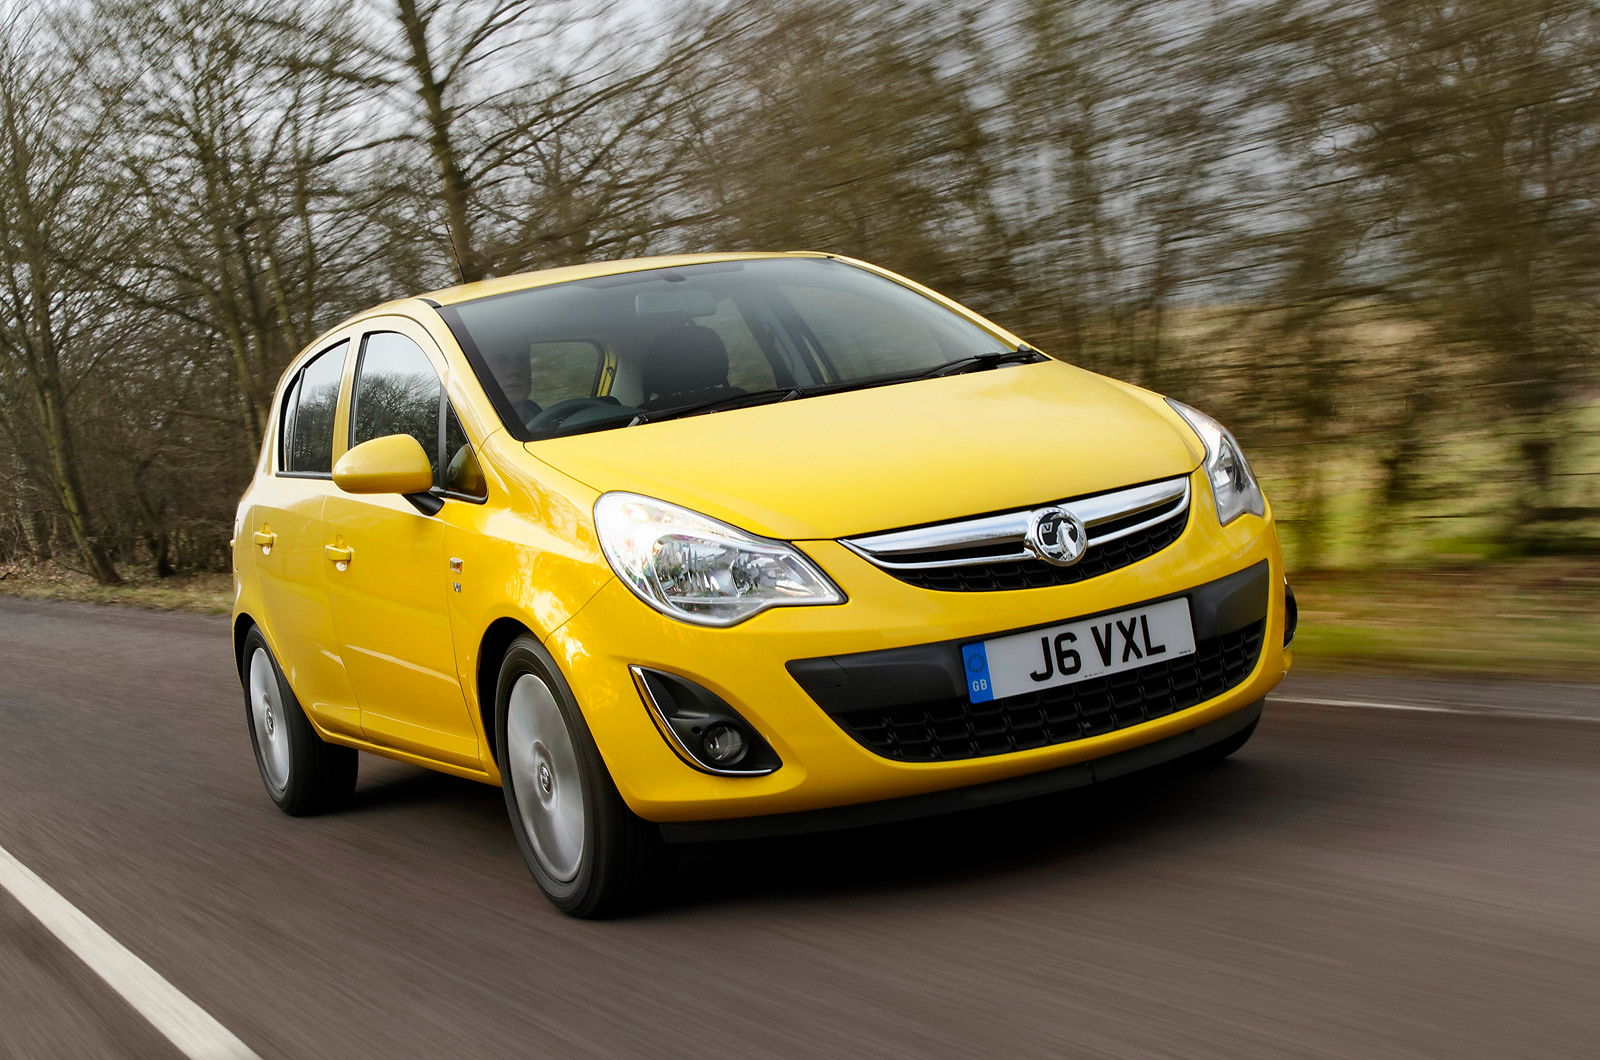 Used Vauxhall Corsa 2006-2014 review